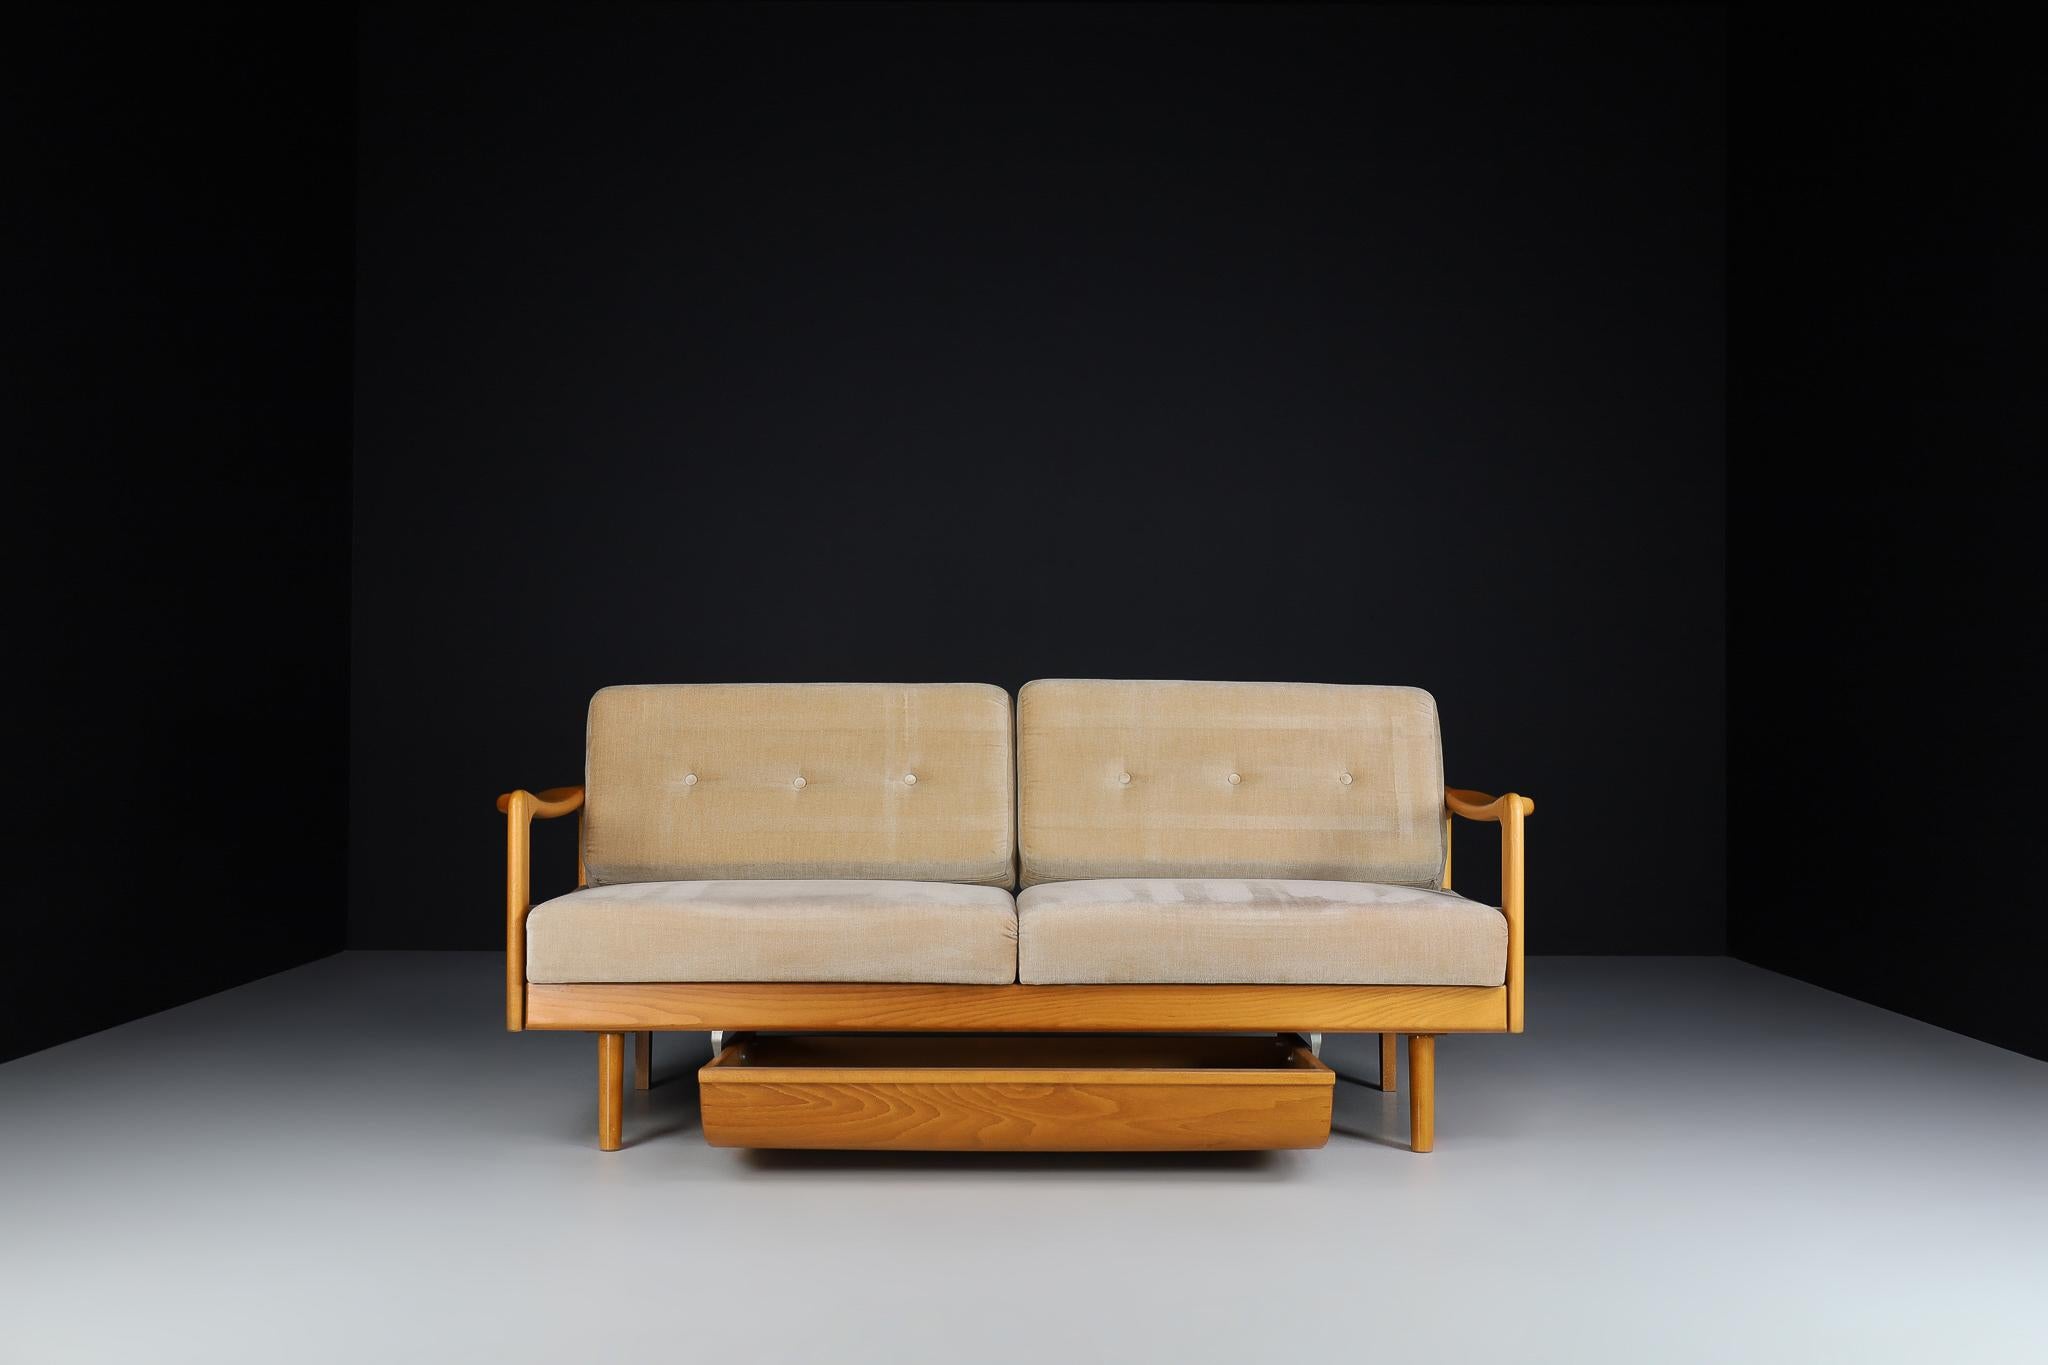 Mid-Century Modern Sofa Model Stella from the 1950s Manufactured by Wilhelm Knoll, Made in Germany